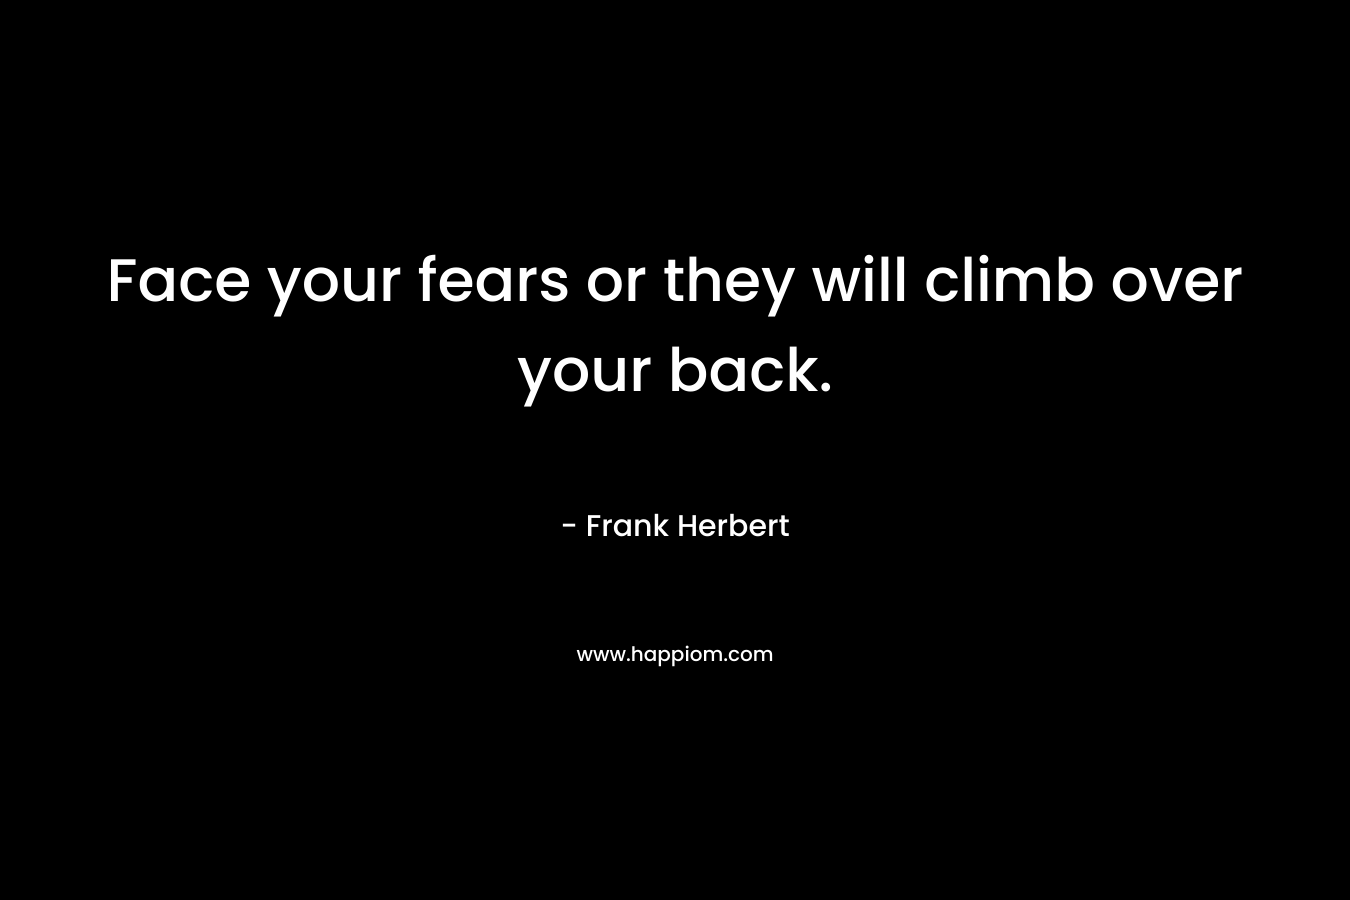 Face your fears or they will climb over your back.